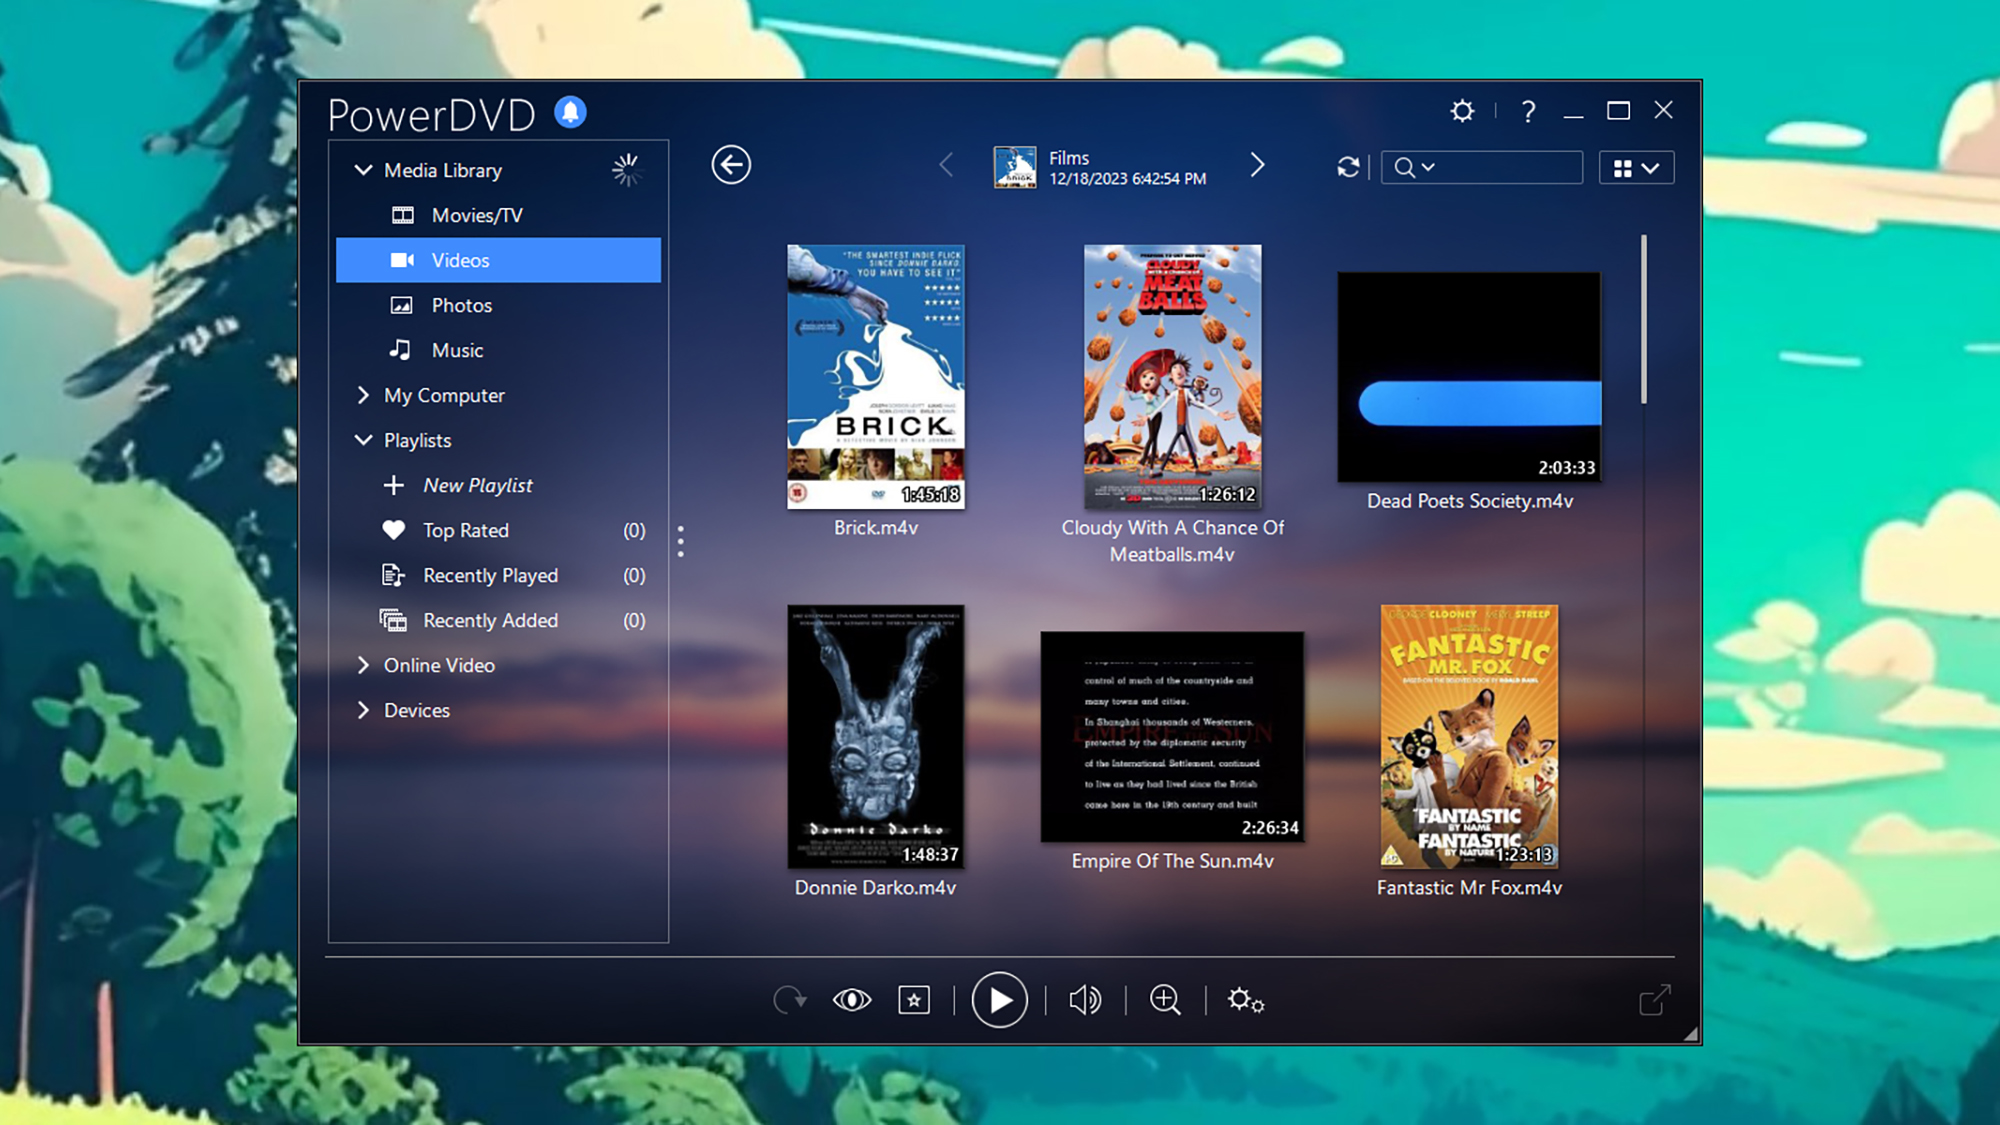 PowerDVD is perhaps the best option for Blu-ray playback, but it'll cost you. Credit: David Nield